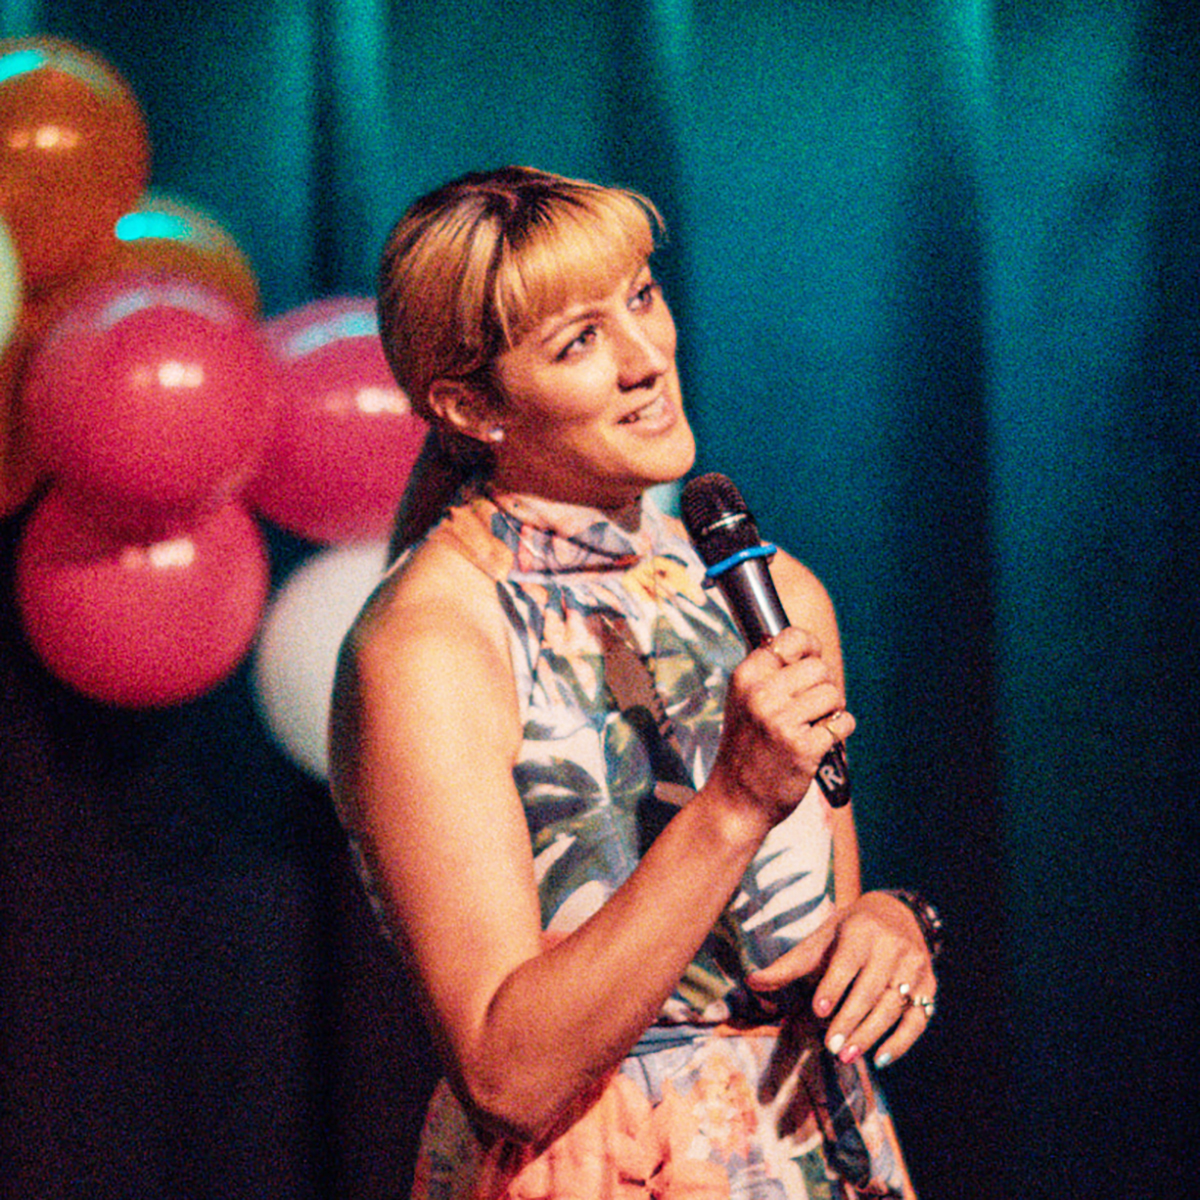 Photo of Ms. Adventure on stage with a microphone